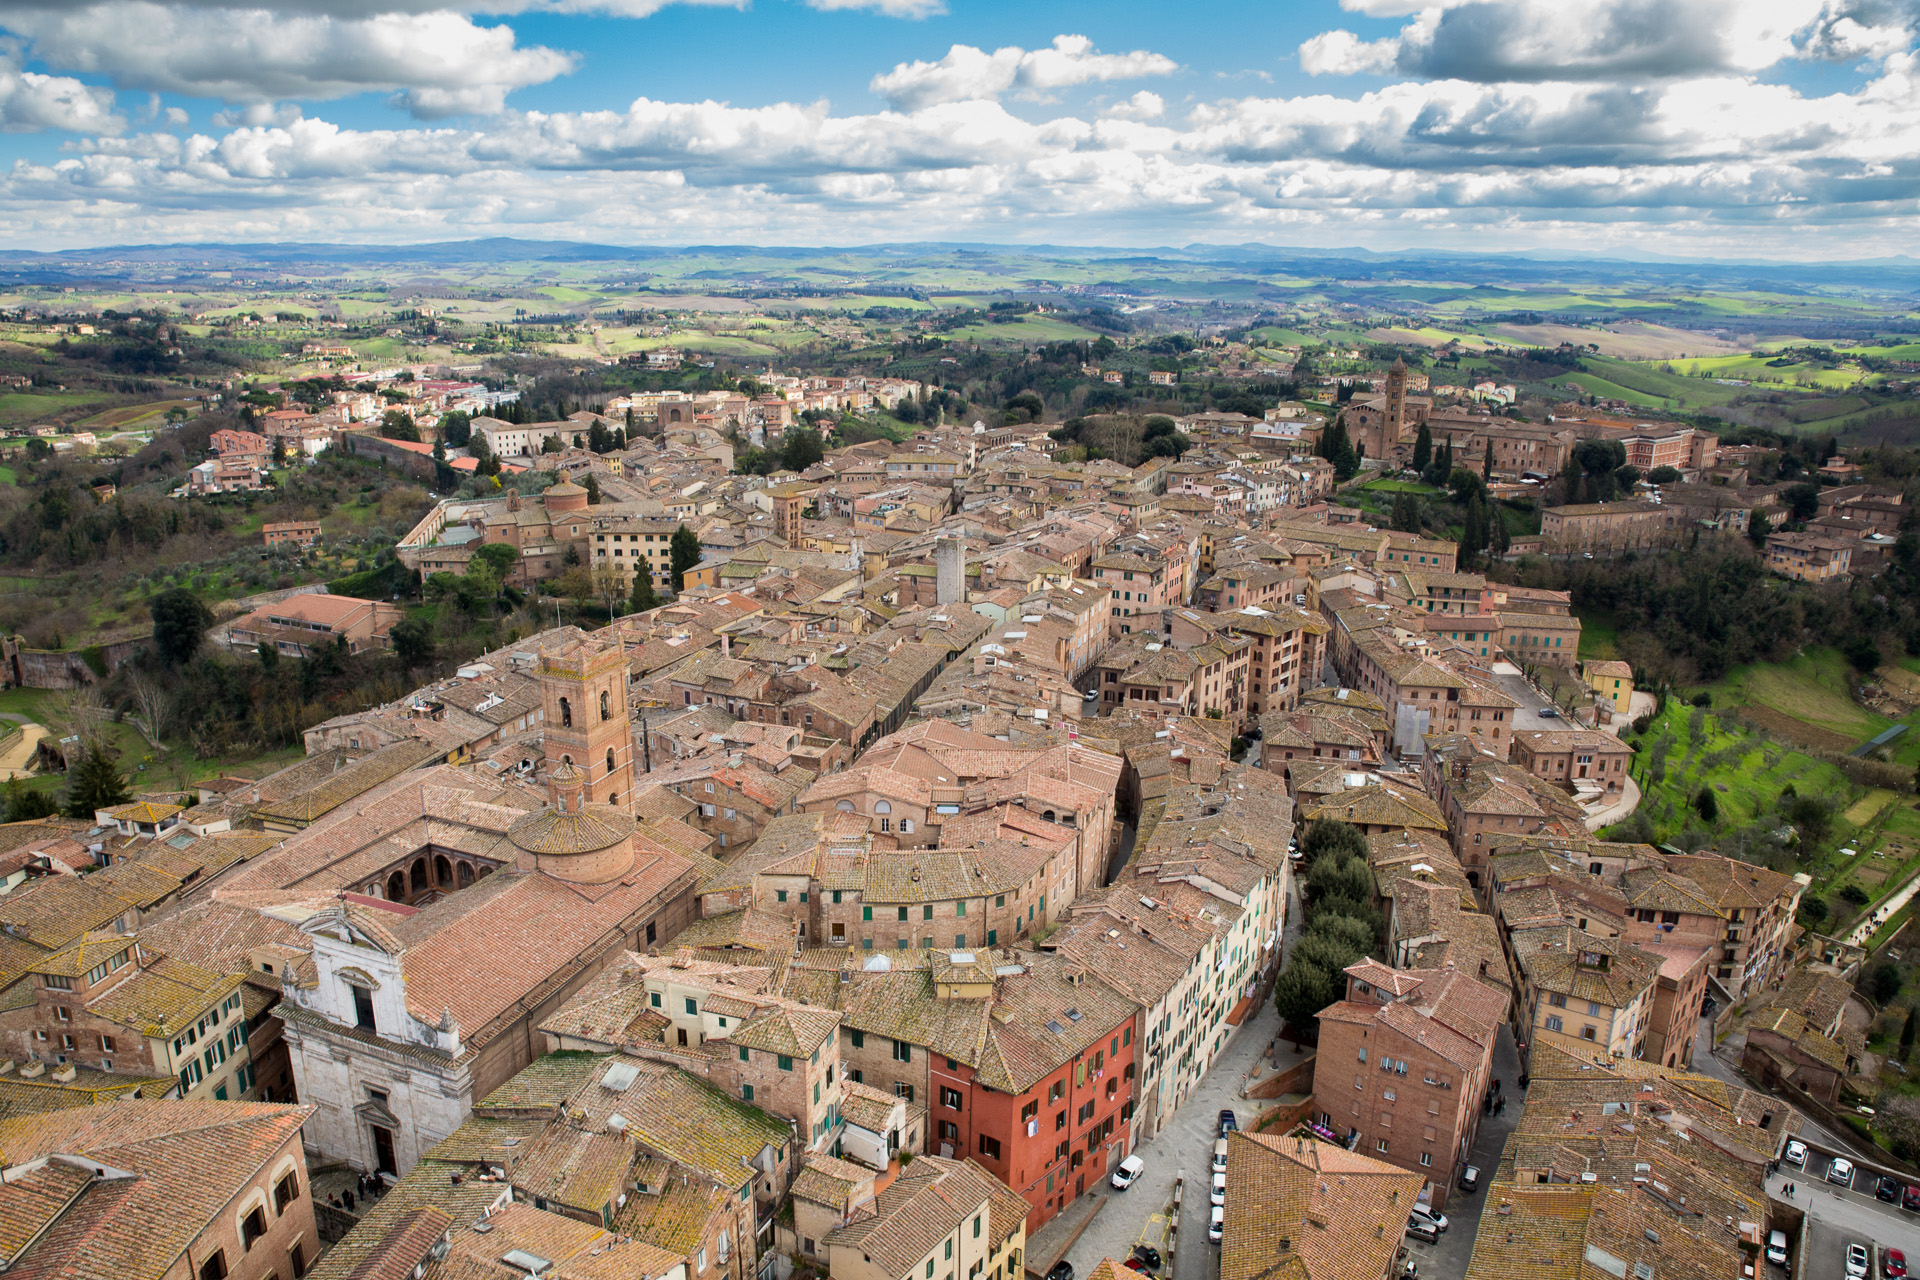 Siena & surrounding hills from the top of Torre del Mangia